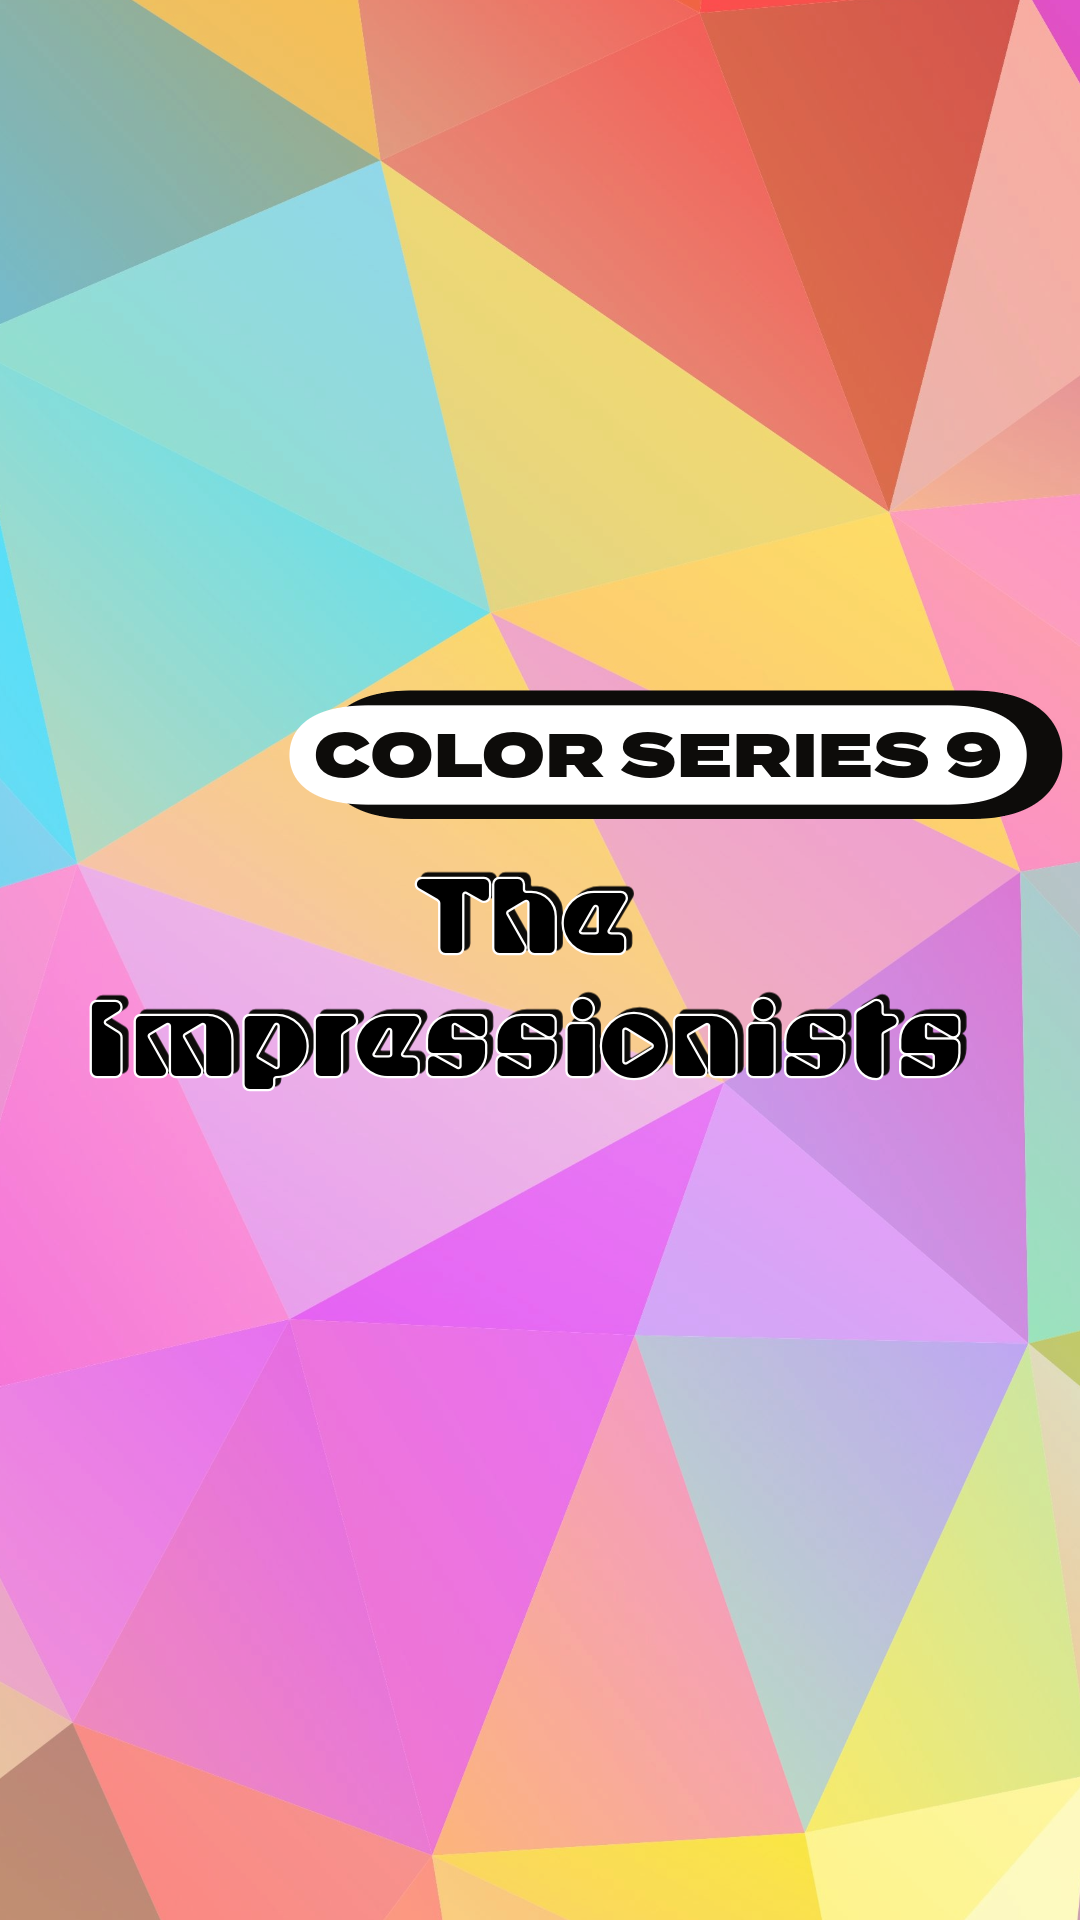 You are currently viewing Color series 9 – The Impressionists: